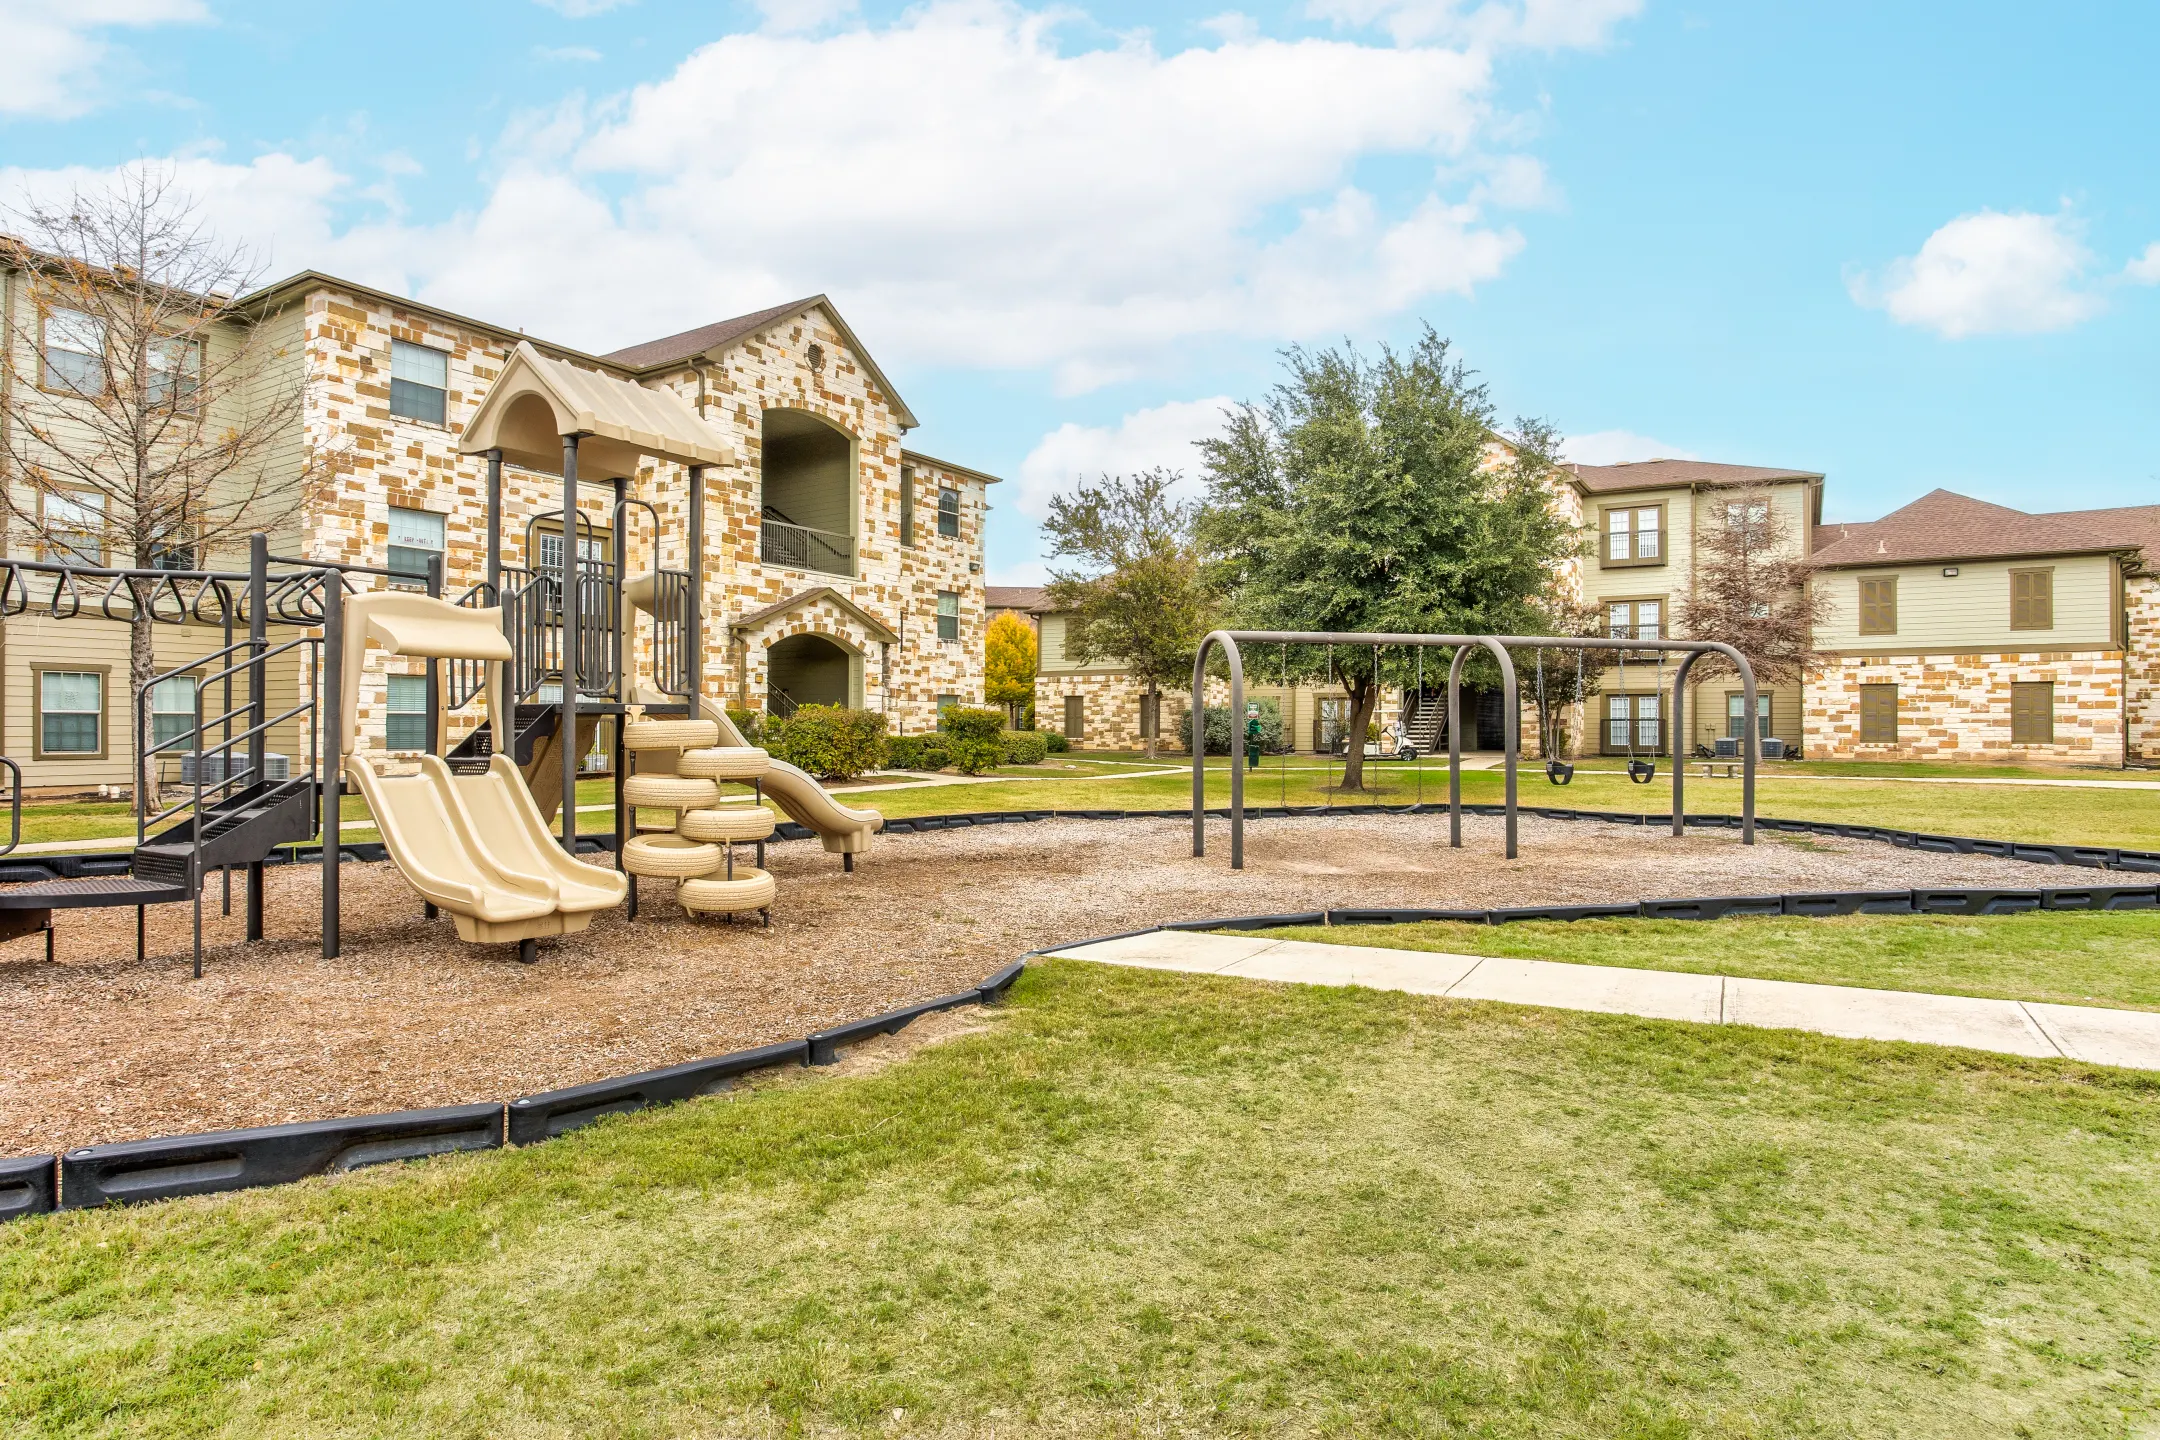 Playground - Lookout Hollow Apartments - Selma, TX